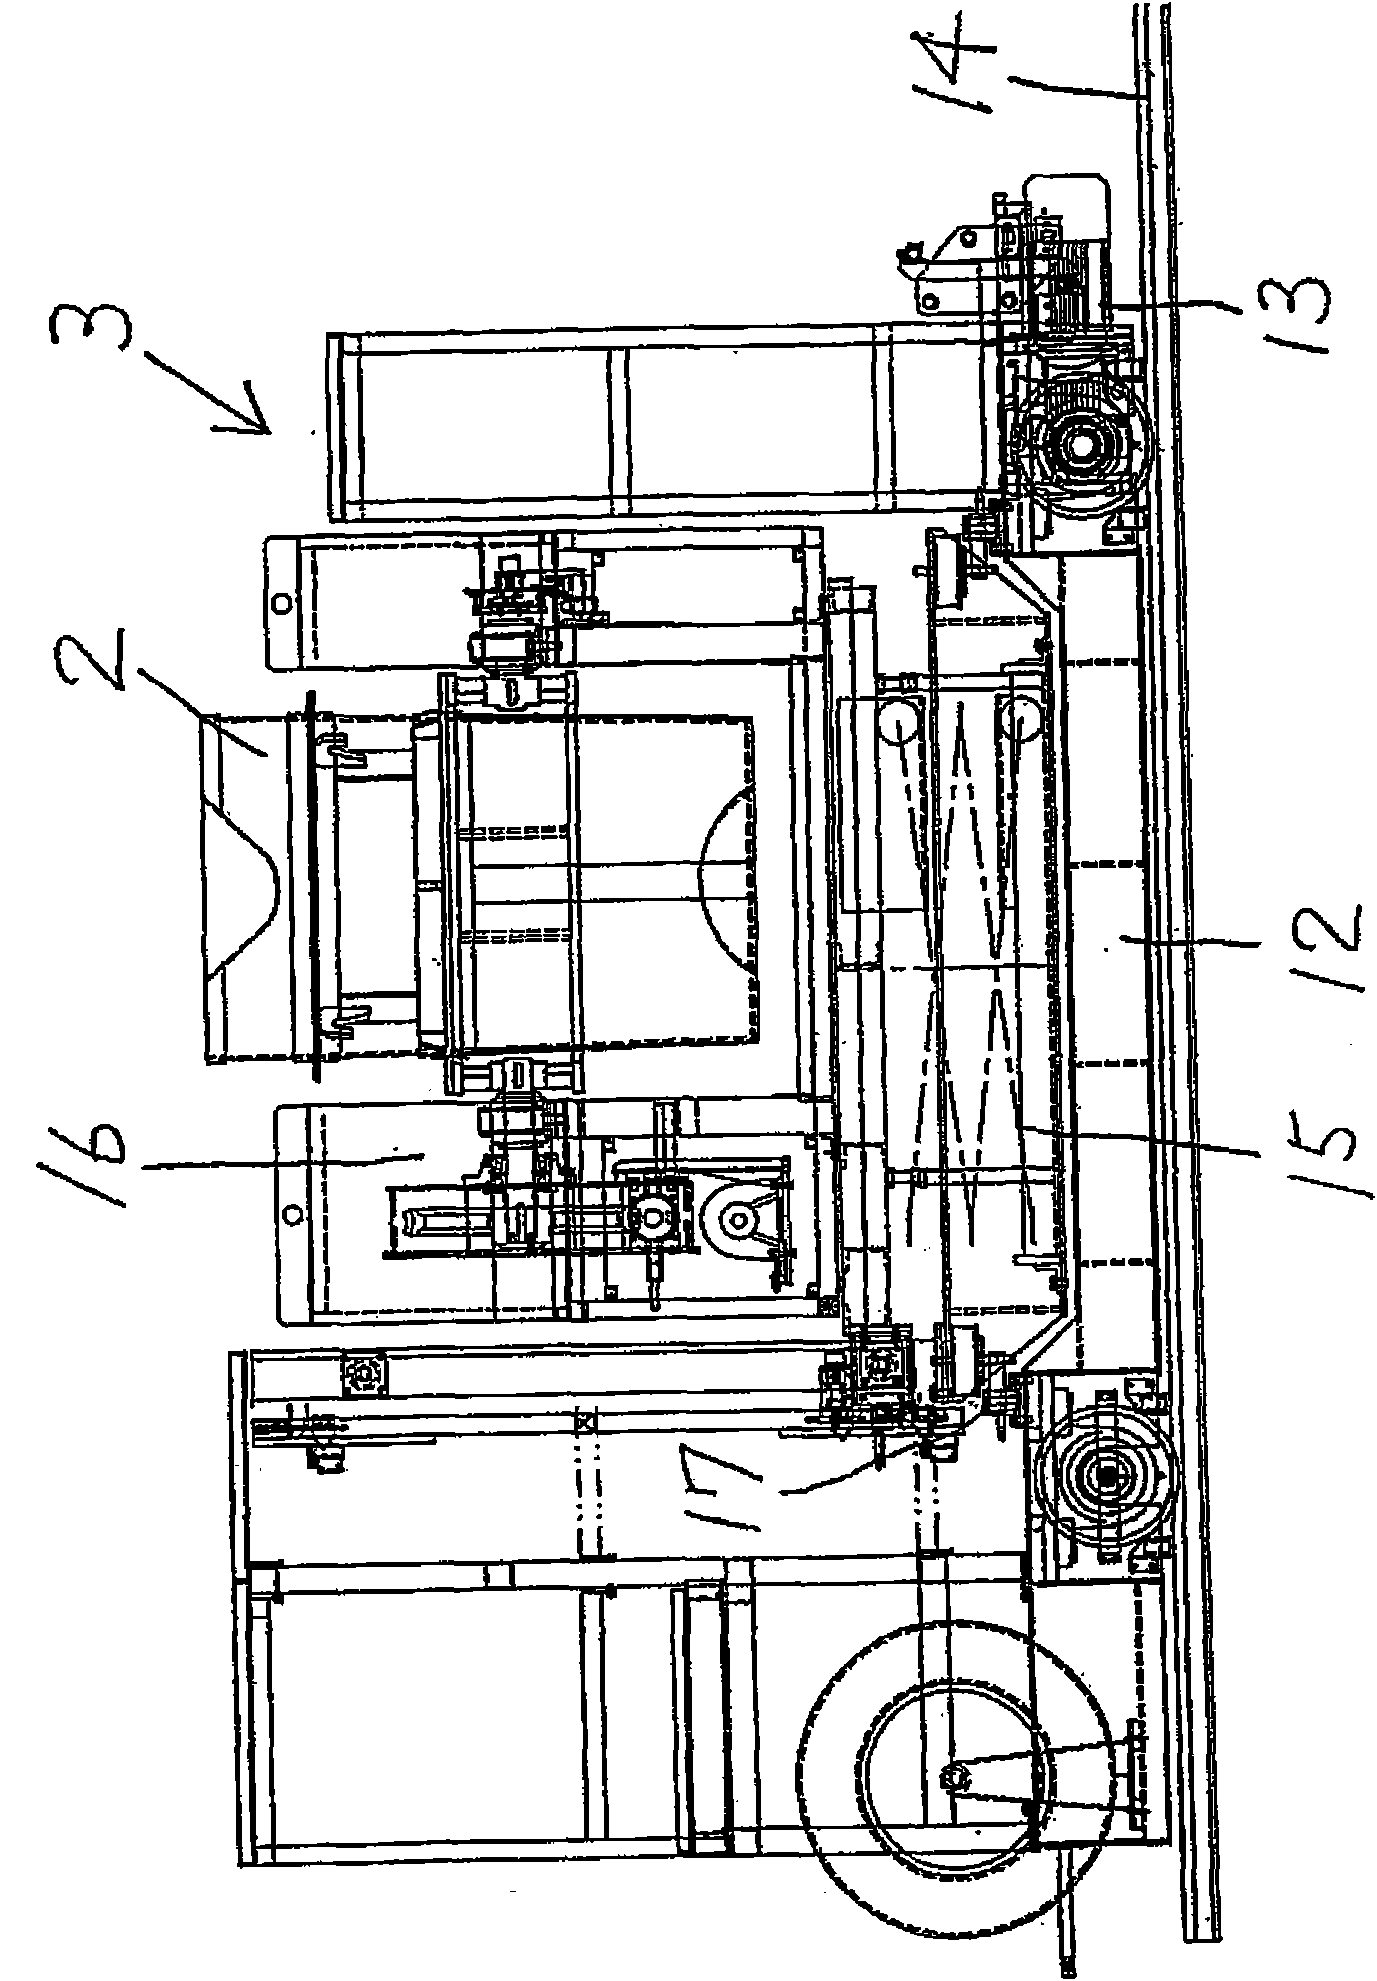 Method of supplying melting metal to the automatic pouring machine and device thereof